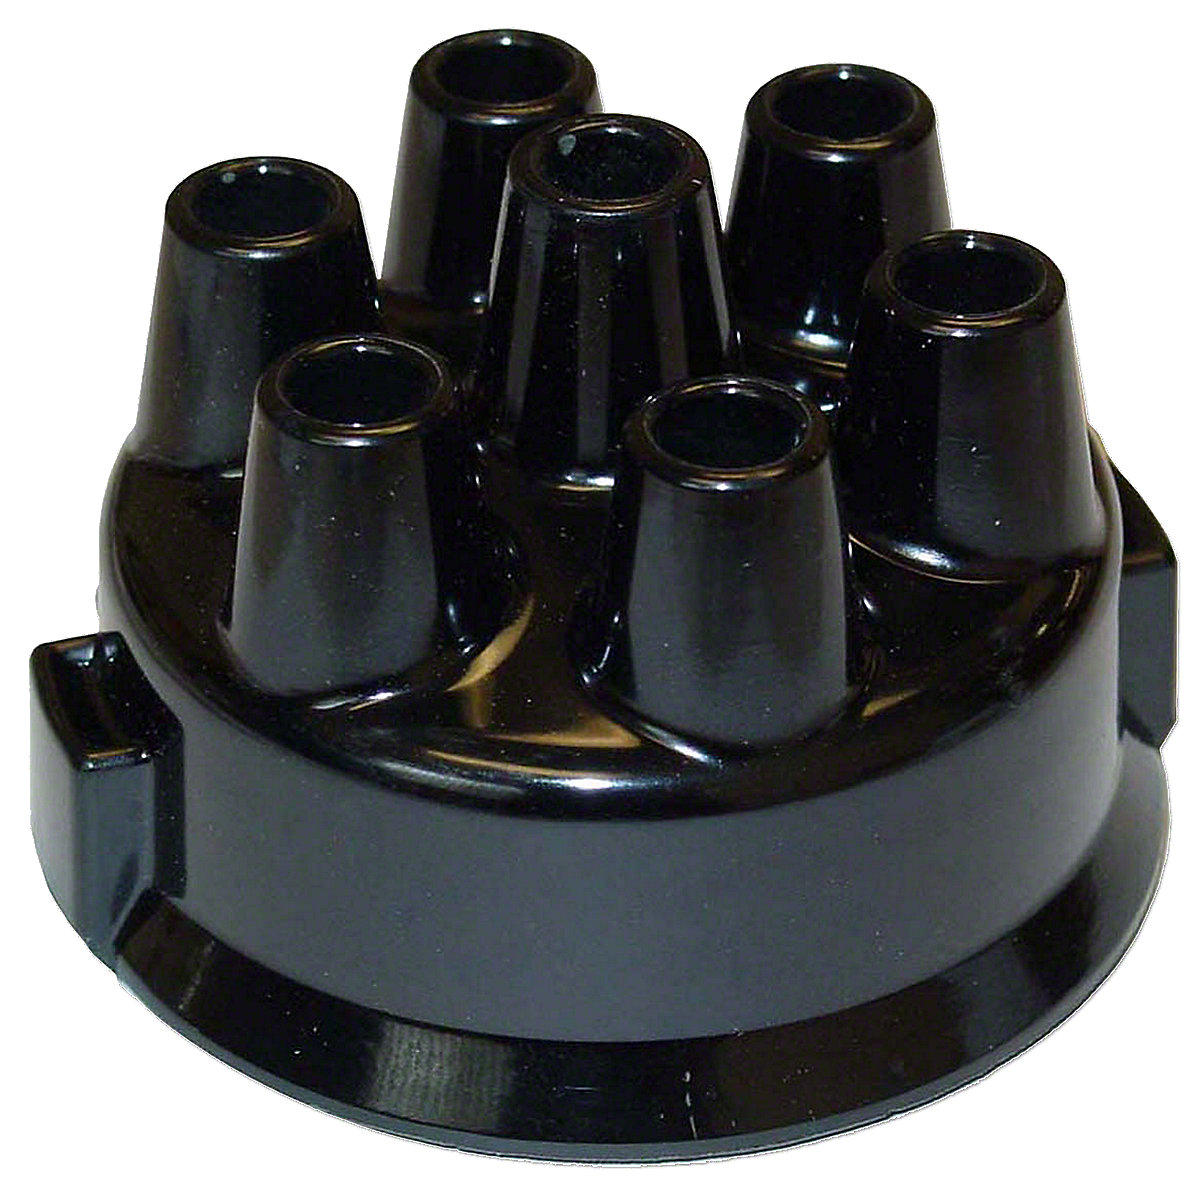 6 cyl Distributor Cap For Early Oliver Tractors With the Clip Held Distributor Cap. Fits Oliver: HG, OC3, Super 44, Super 55, 60, 70, 66, 77, Super 77, 88, Super 88, 90, 99, 440, 550, 660, 770, 880, and 1800 UP TO SN#:124395 Replaces Oliver PN#:k7406, Delco PN#:824735 